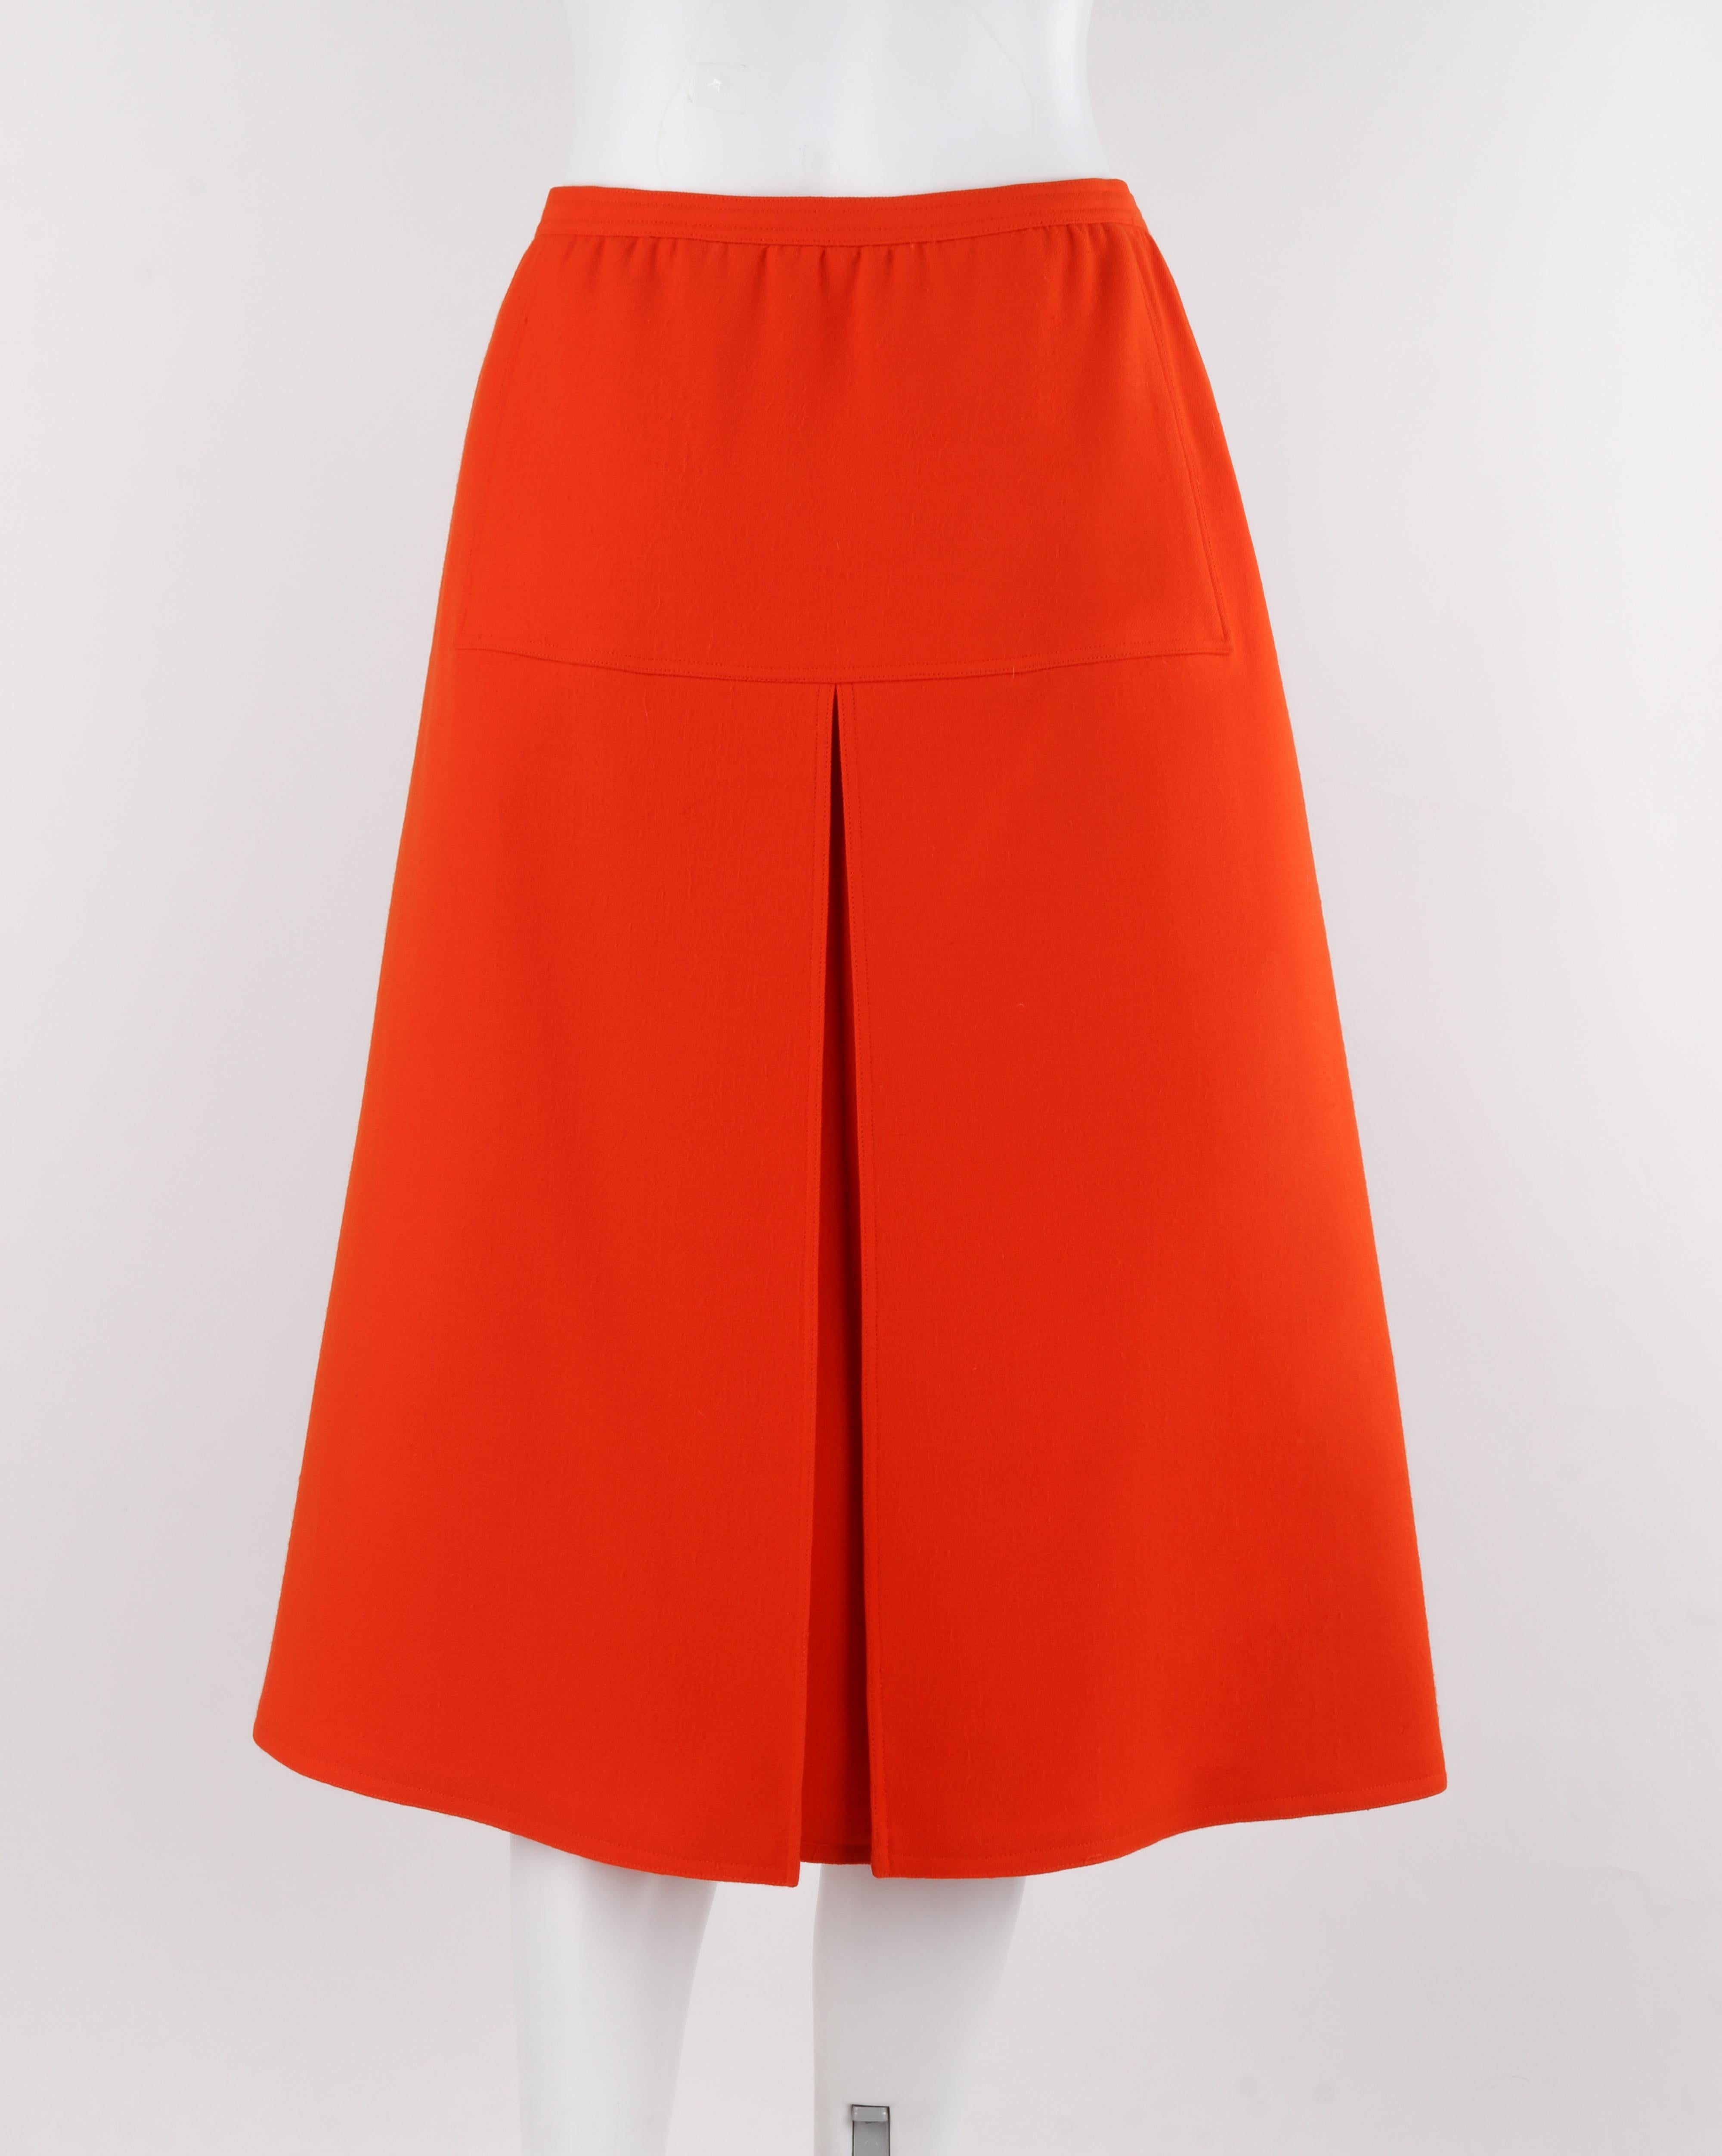 COURREGES c.1960's Vtg Orange Wool A Line Pleated Knee Length Button Skirt For Sale 1